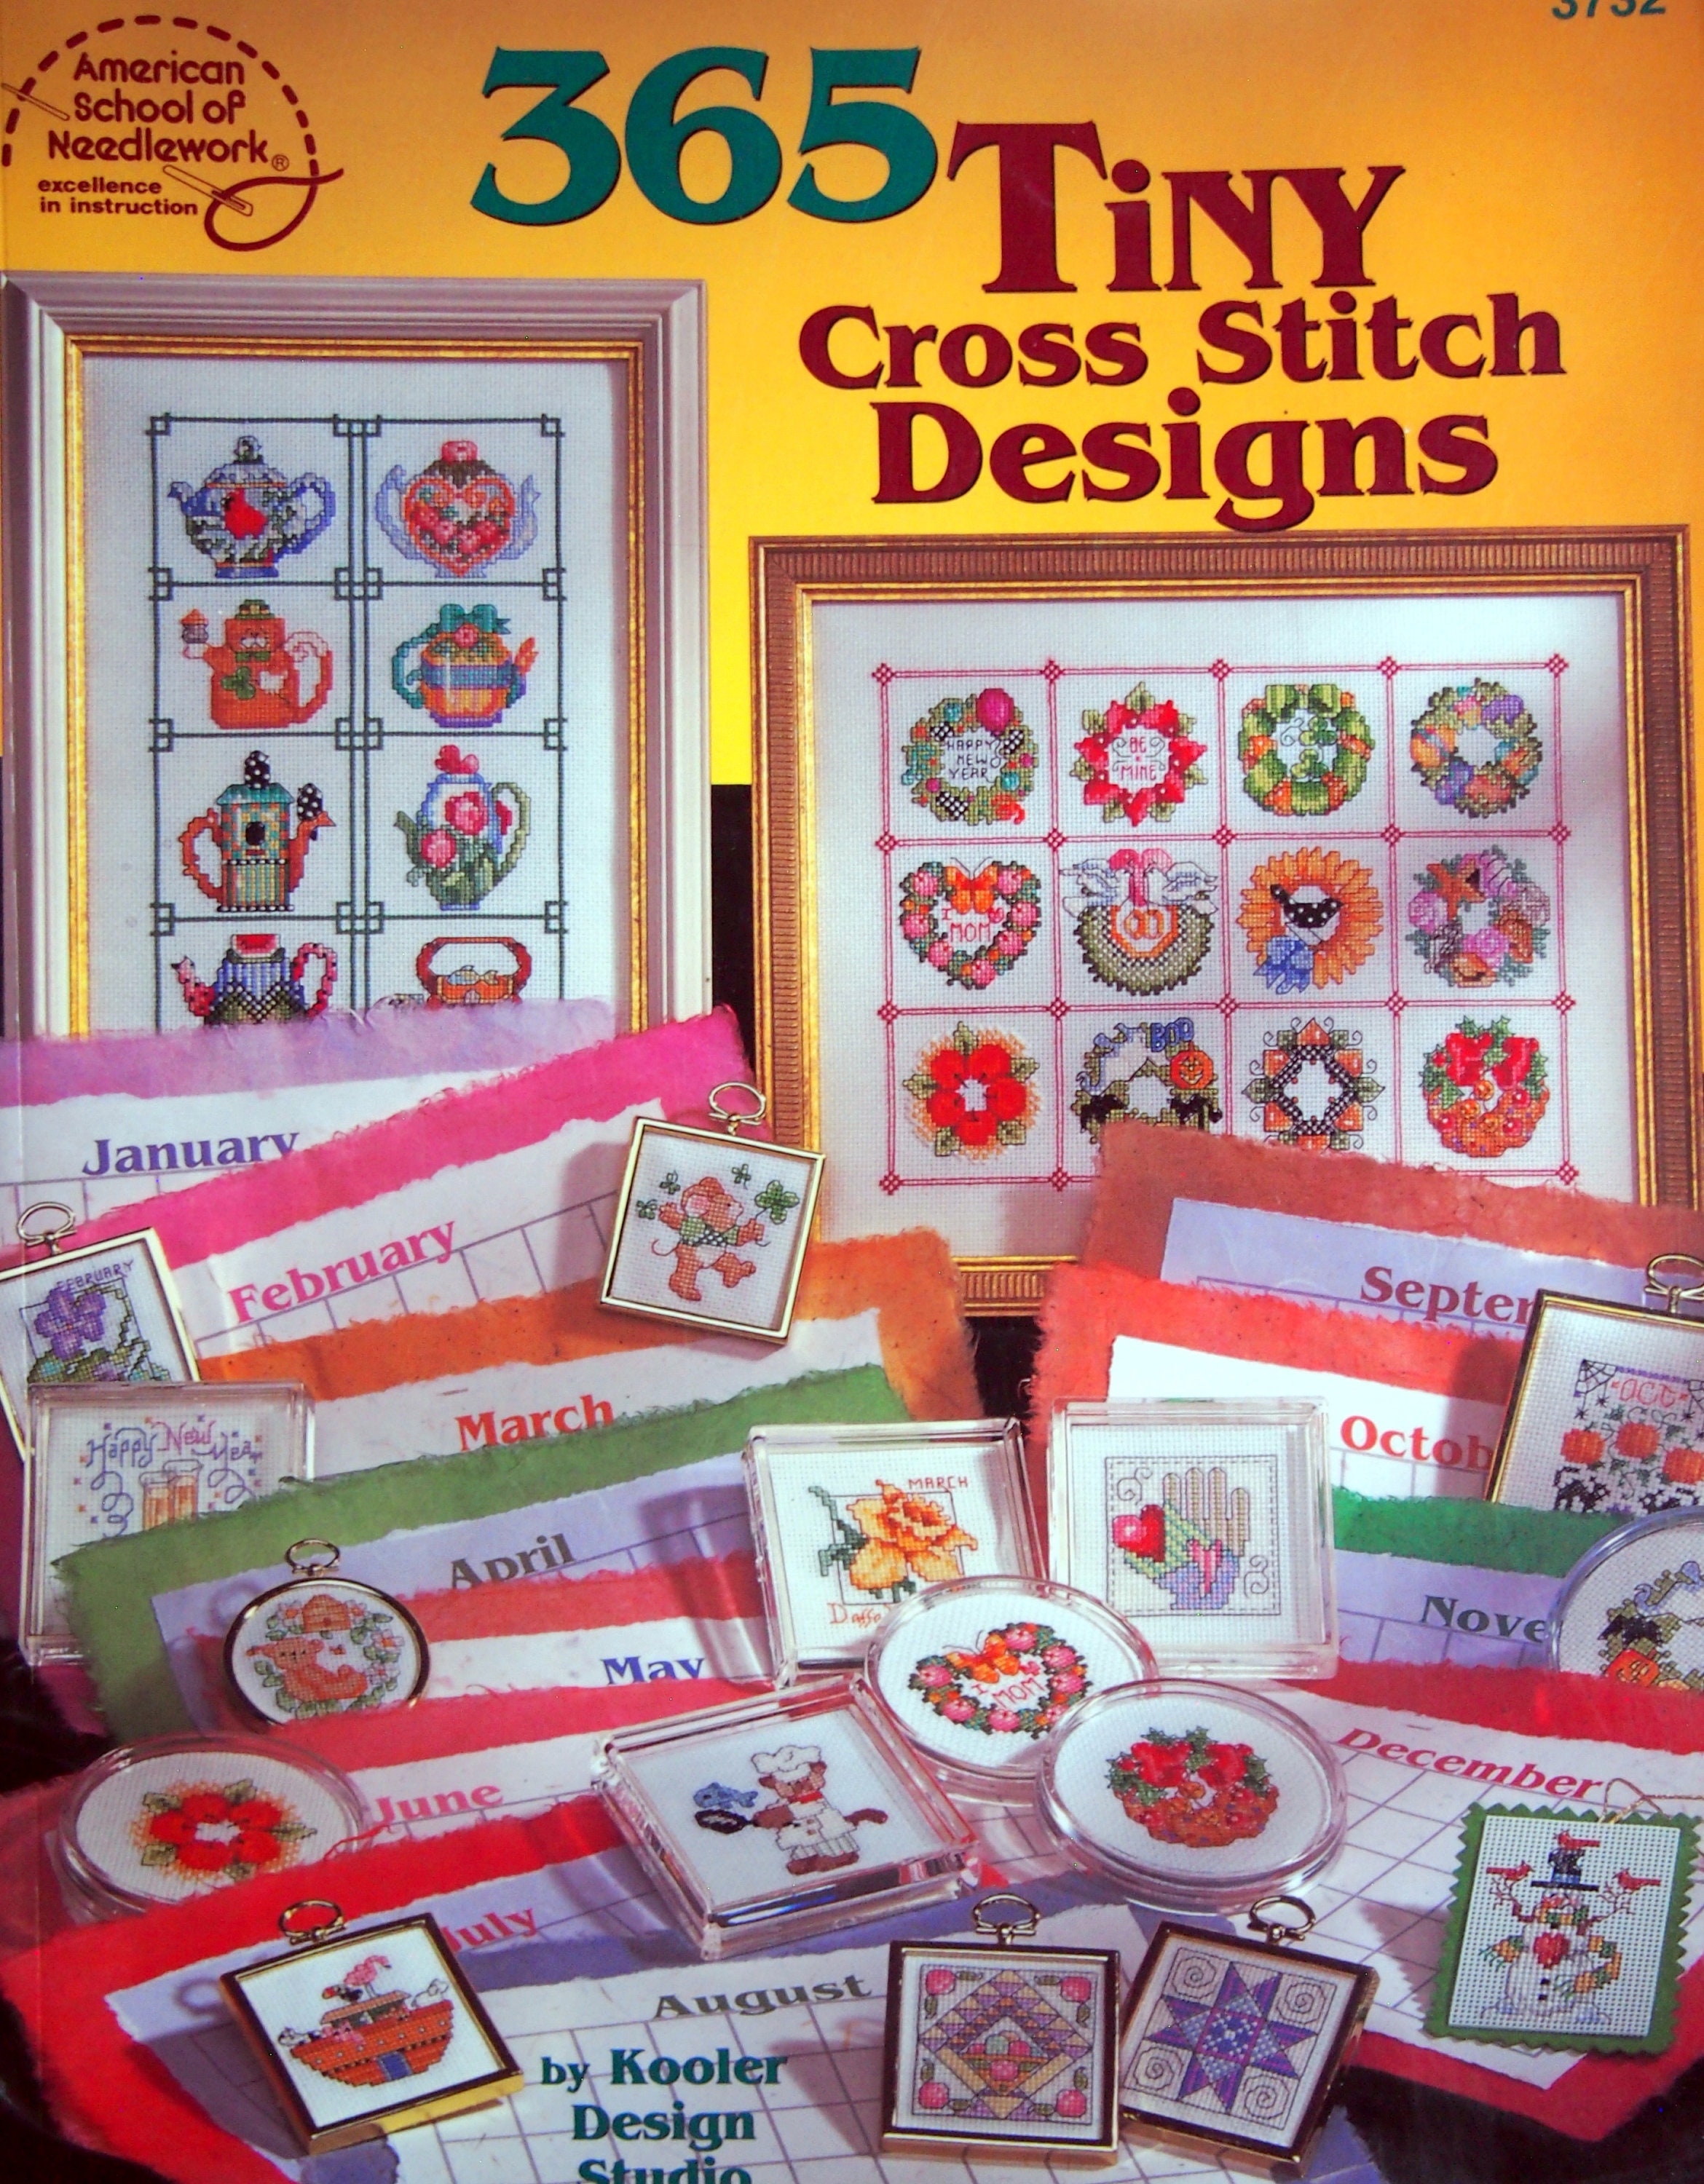 Donna Kooler Cross-Stitch Christmas Vintage 1996 Counted Cross